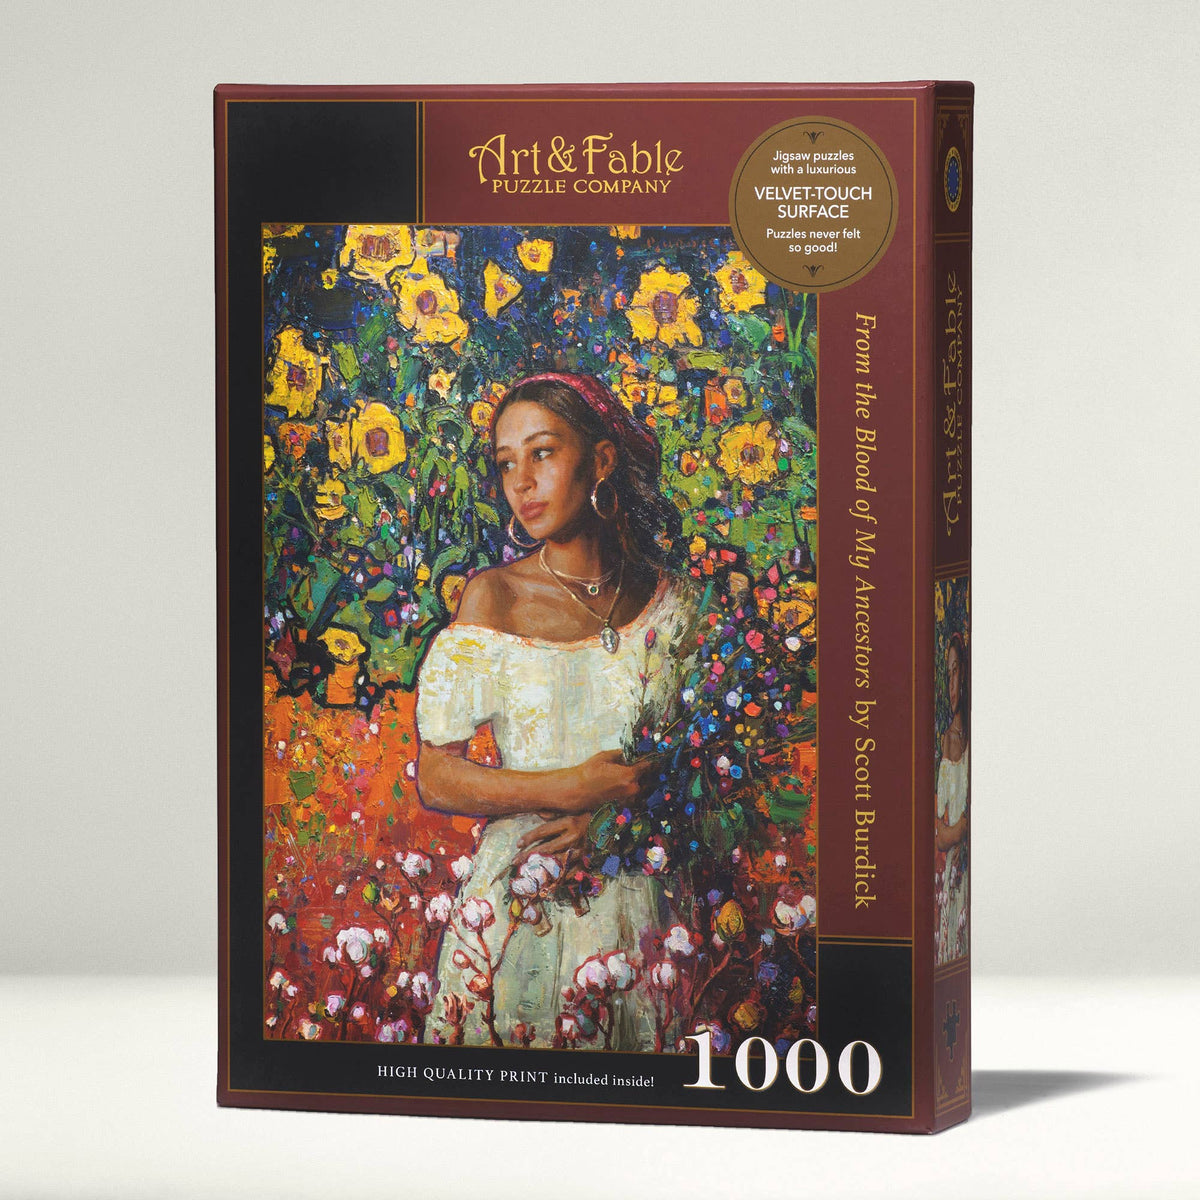 NEW! From the Blood of My Ancestors, 1000 Piece Jigsaw Puzzle